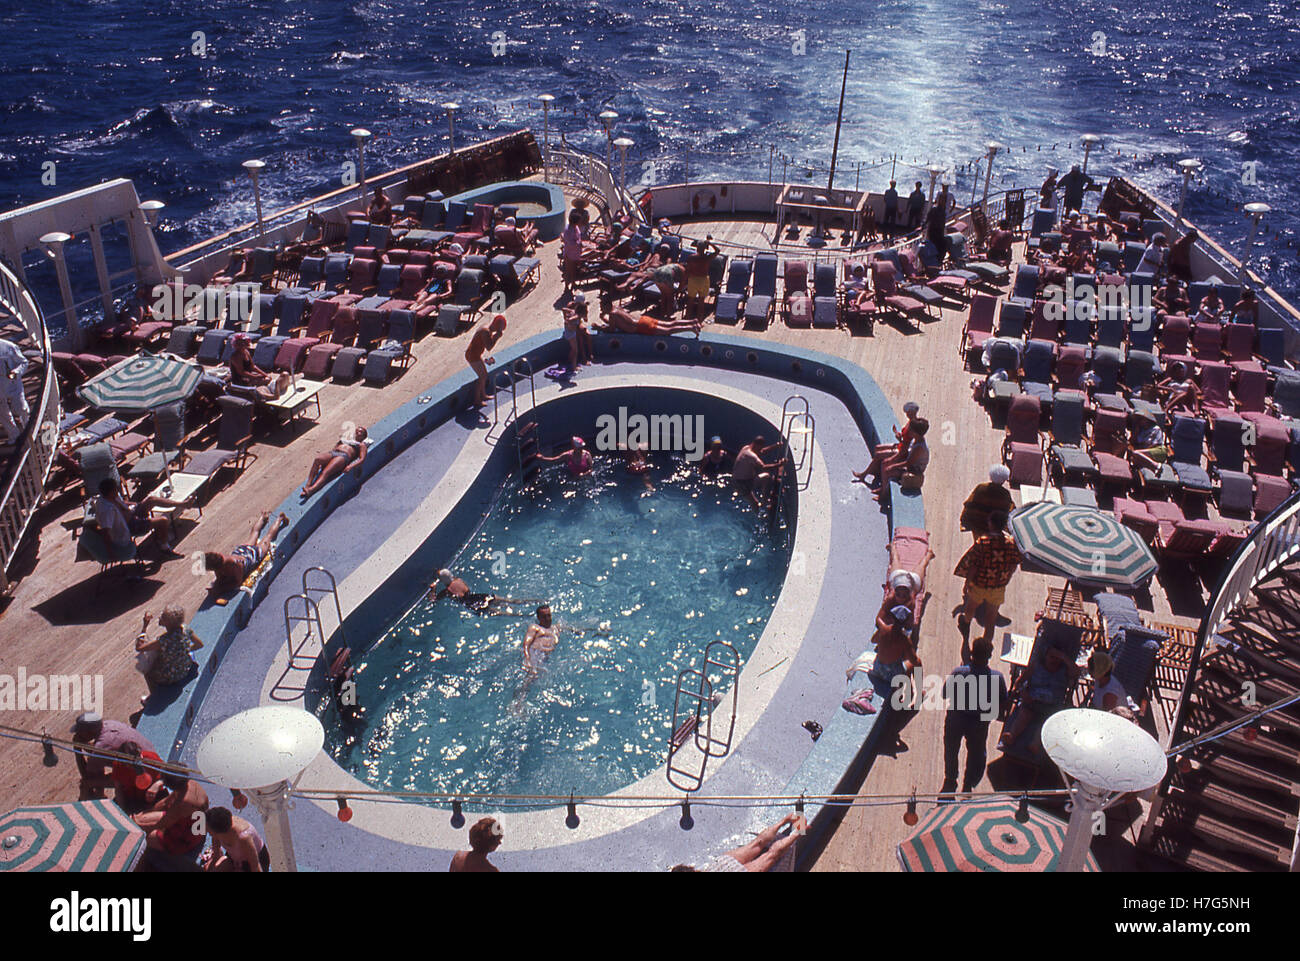 Cruising in the 1960s, picture shows a swimming pool and deck chairs on a cruise ship of this era. Stock Photo